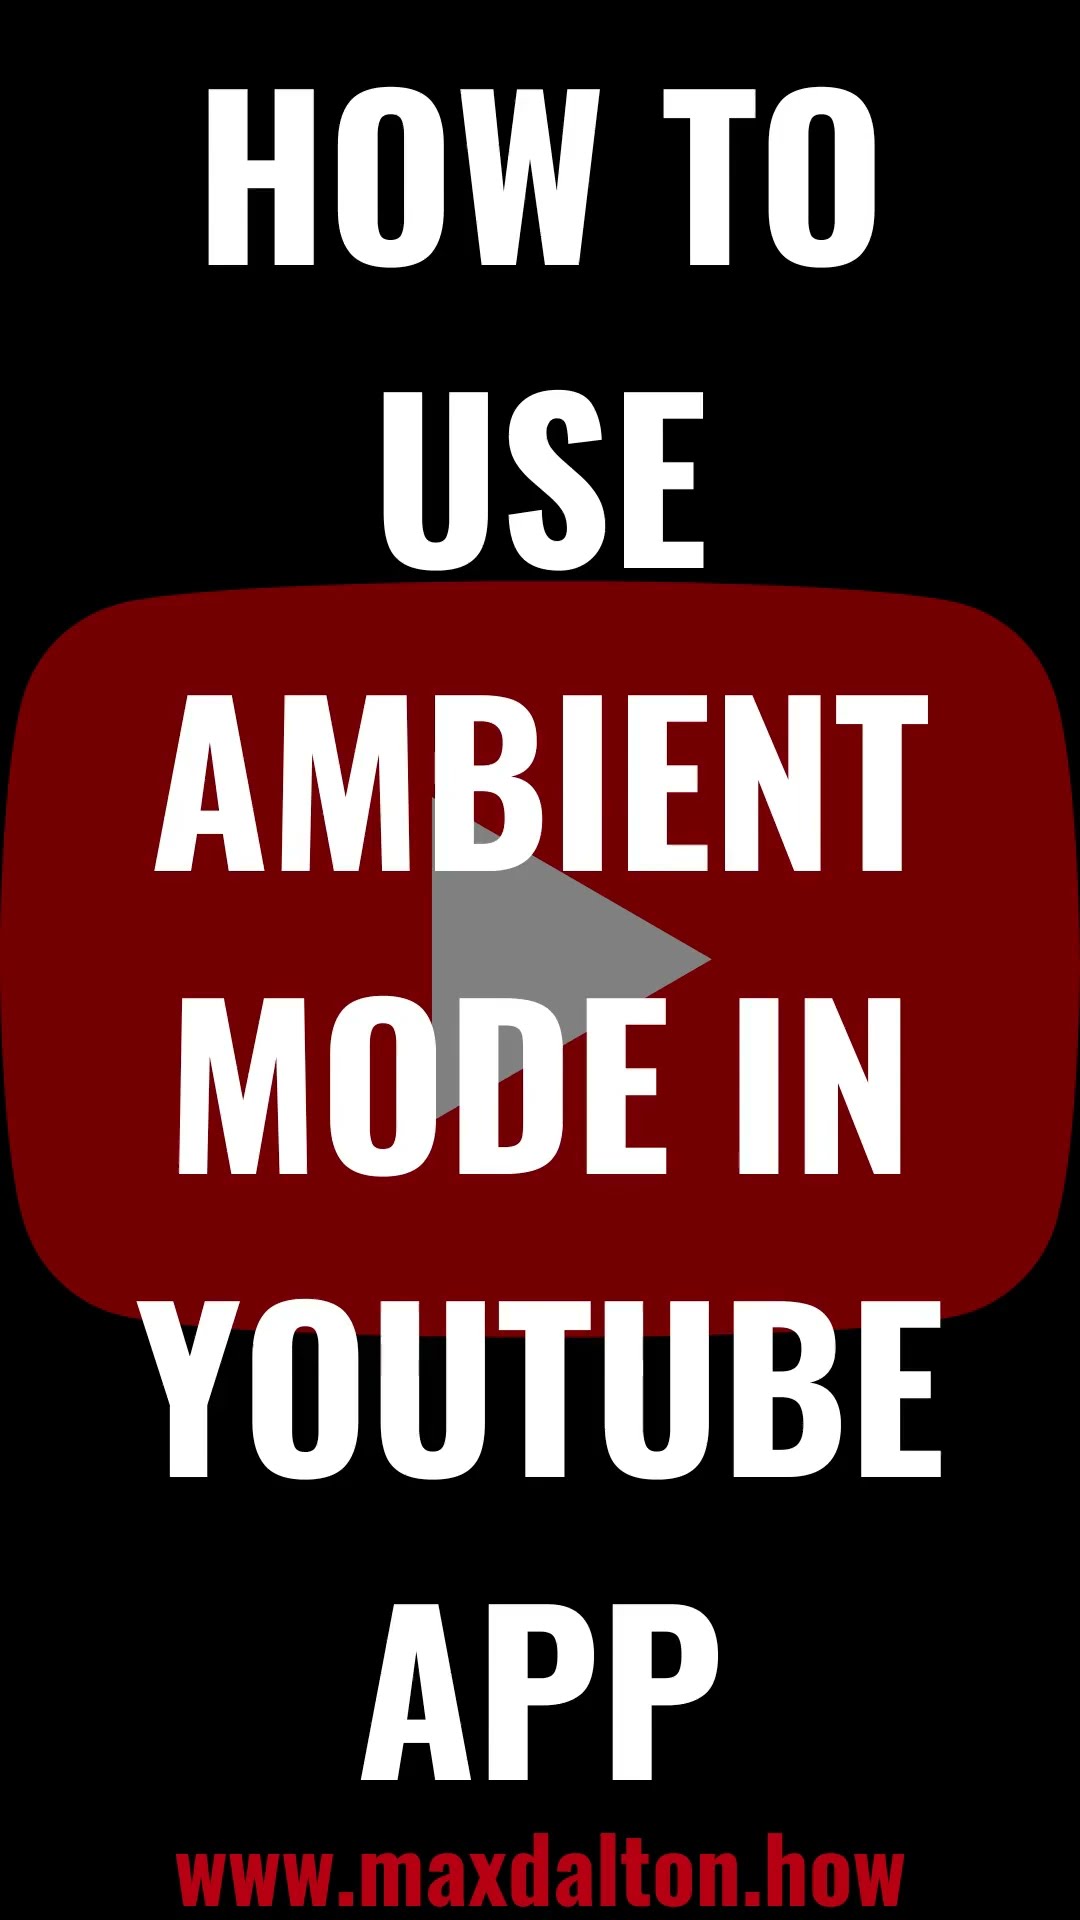 How to use ambient mode in the YouTube app